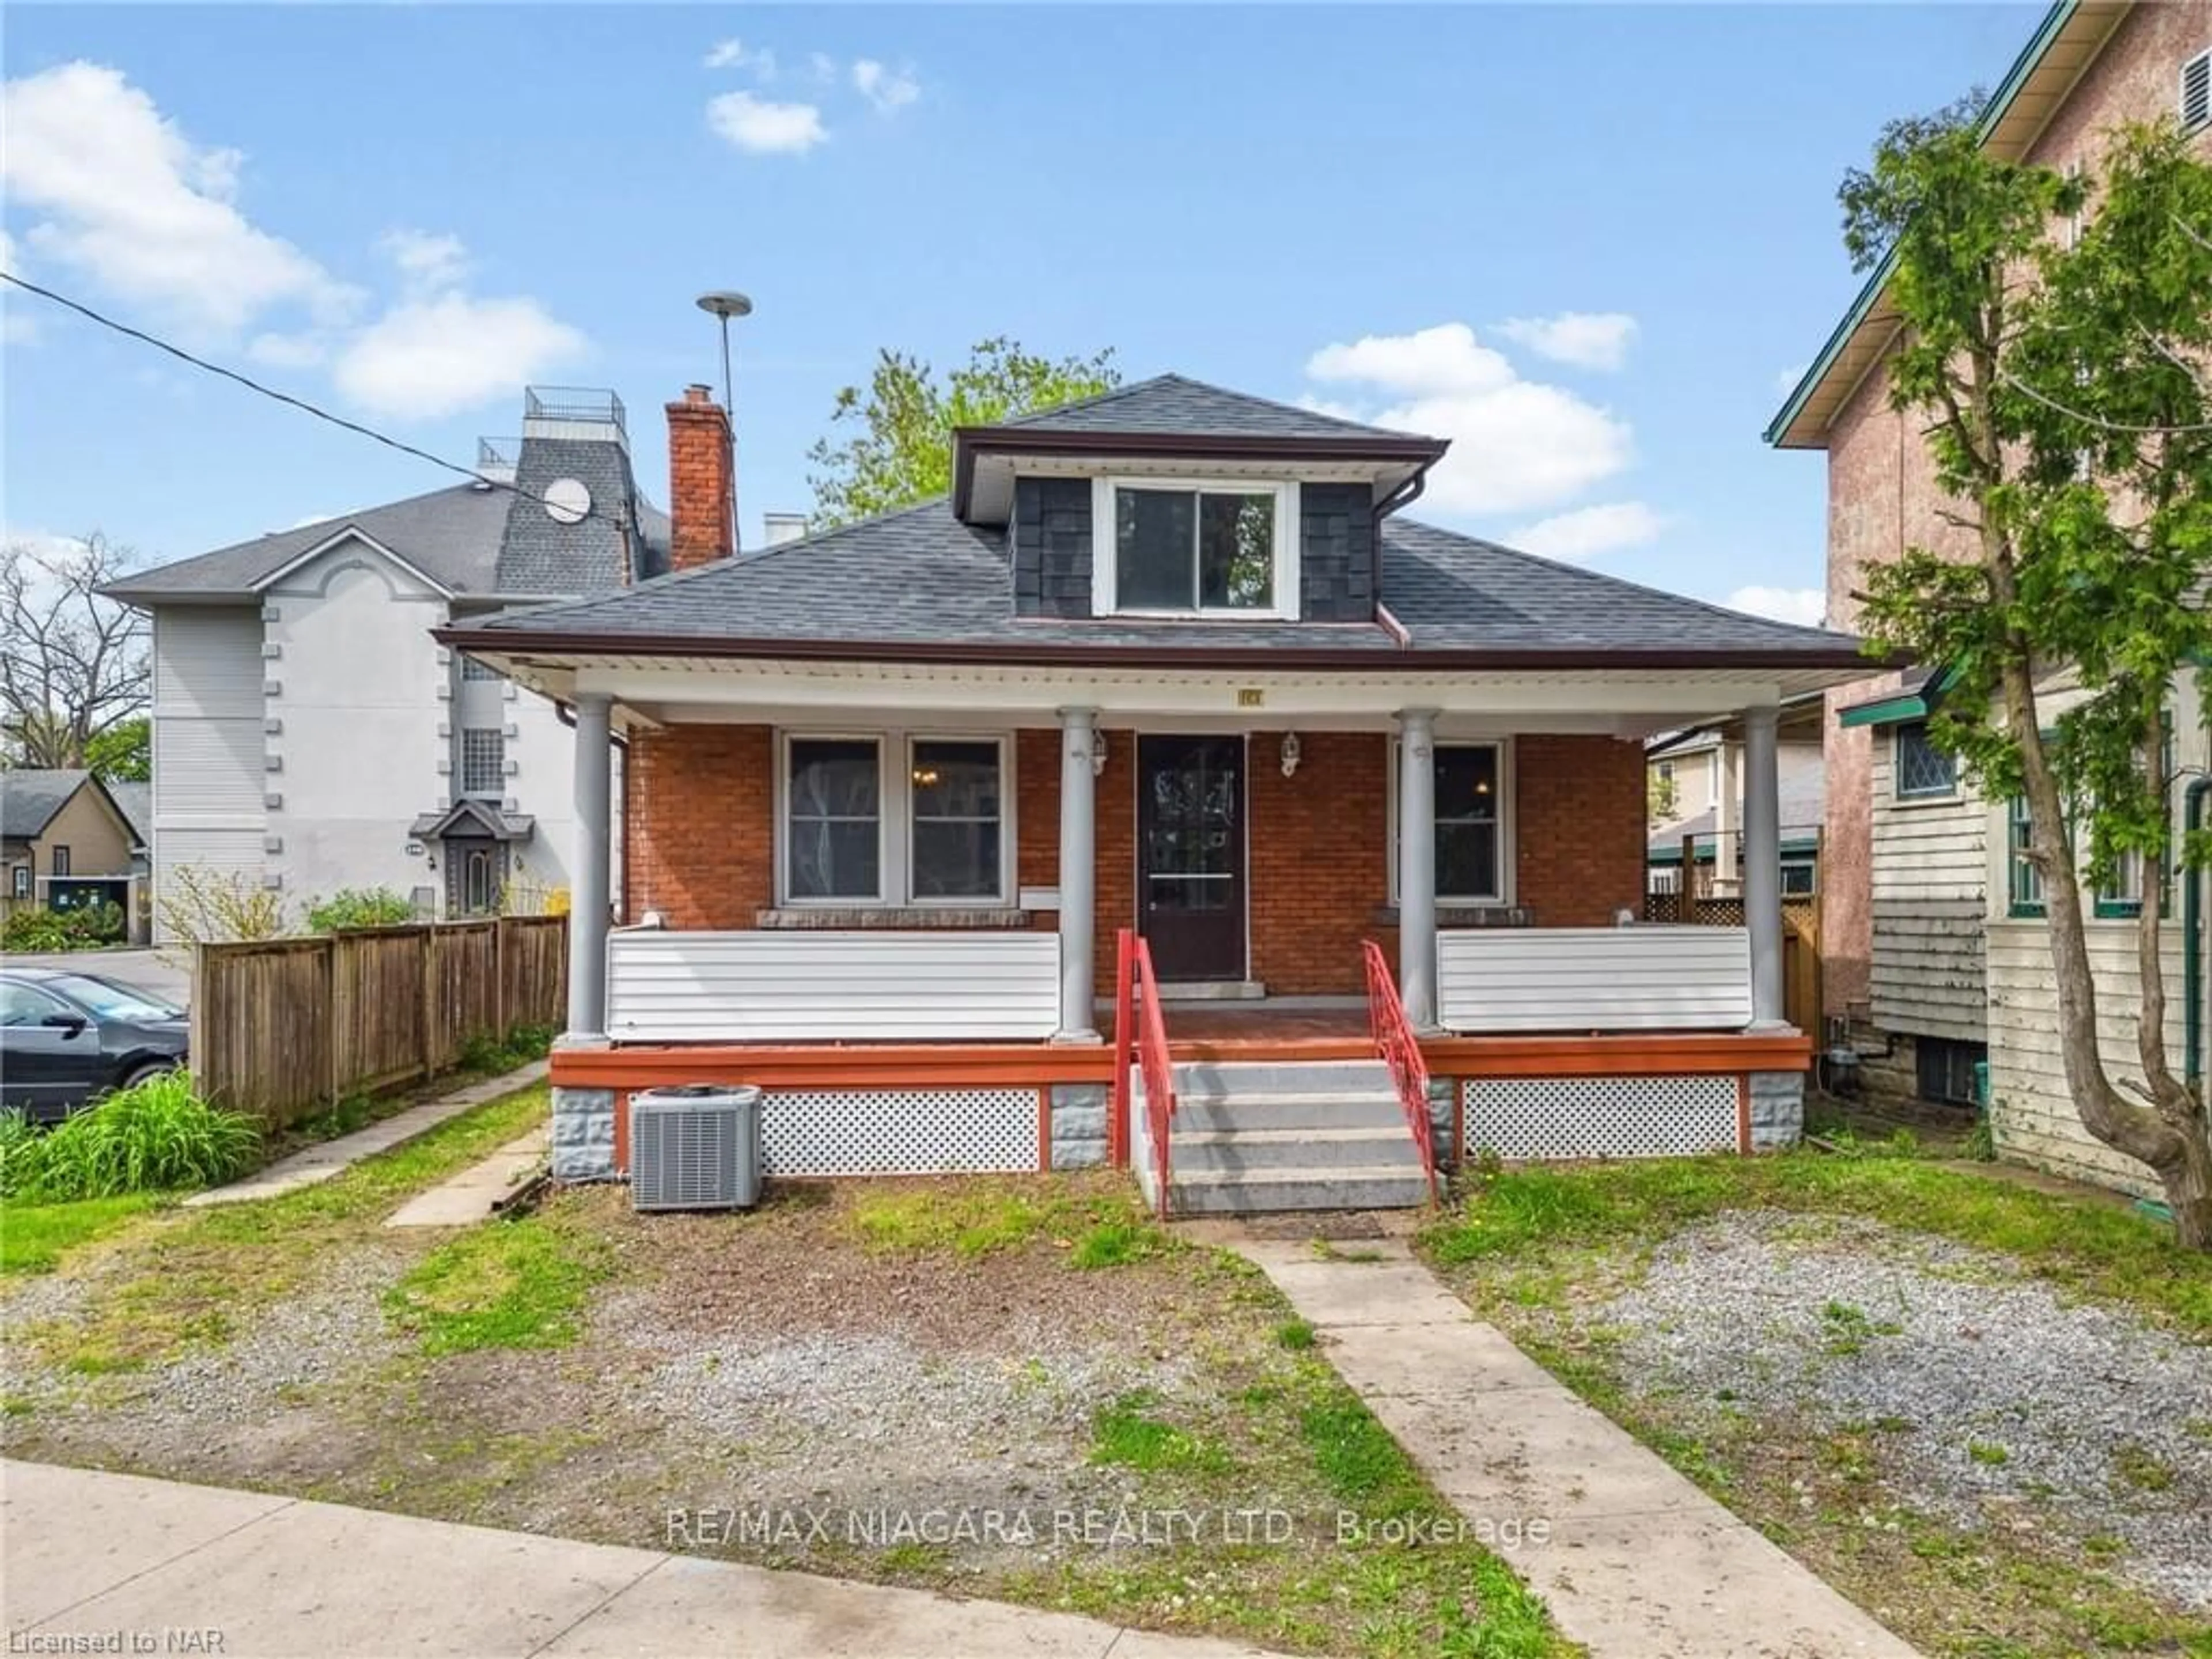 Frontside or backside of a home for 161 Lake St, St. Catharines Ontario L2R 5Y6